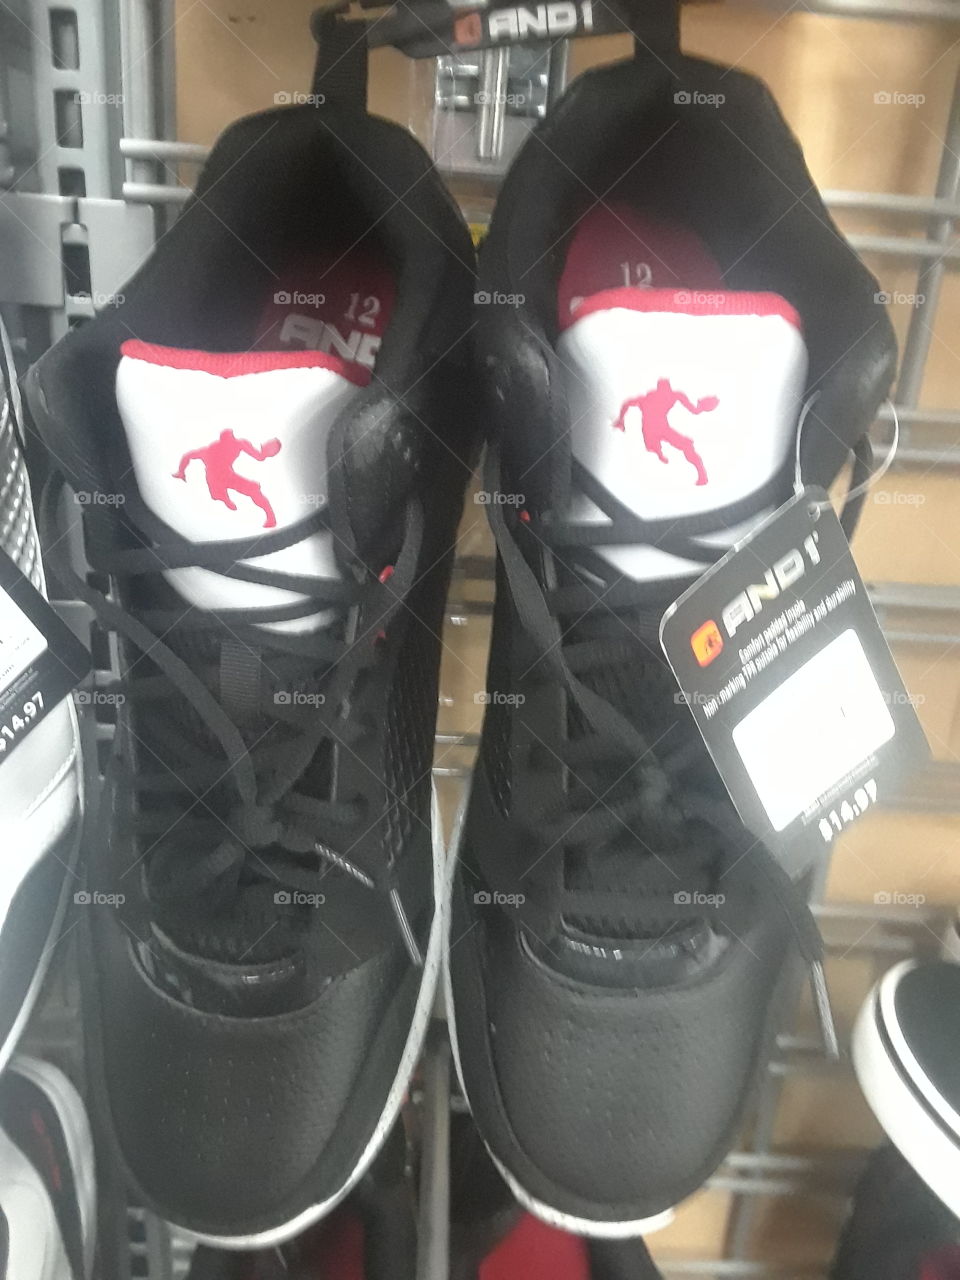 good basketball shoes.cheap price.id rather buy 2 or 3 of these then to have expensive $100 shoes in life.Get buckets out thete.shooting the 3 ball.jordan.$14.97 at Wal-Mart